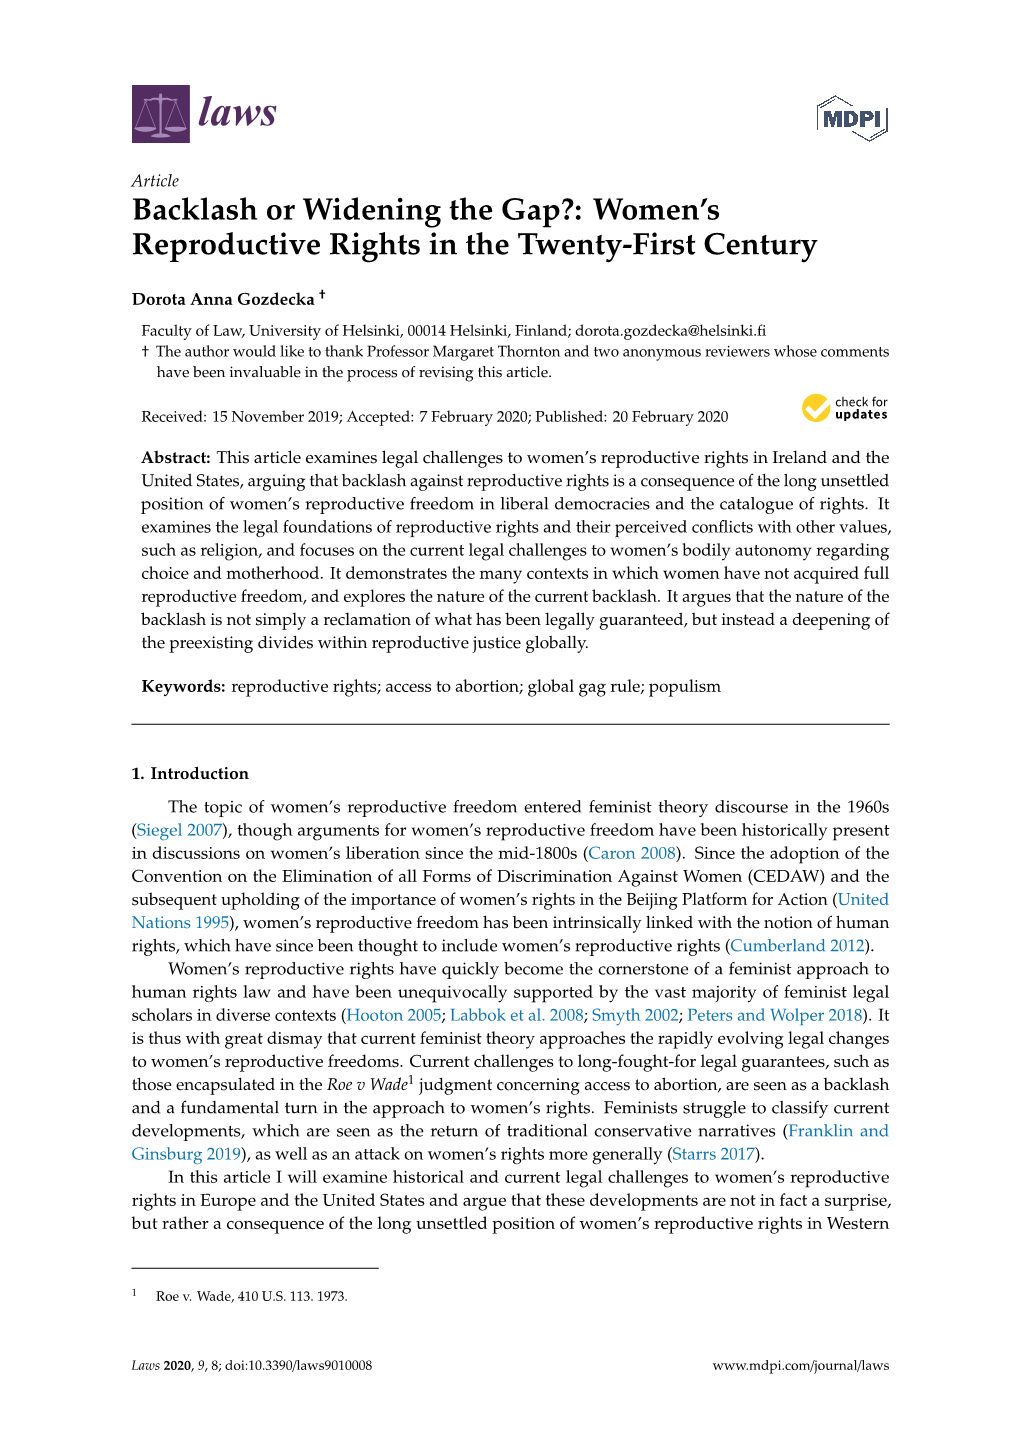 Backlash Or Widening the Gap?: Women’S Reproductive Rights in the Twenty-First Century